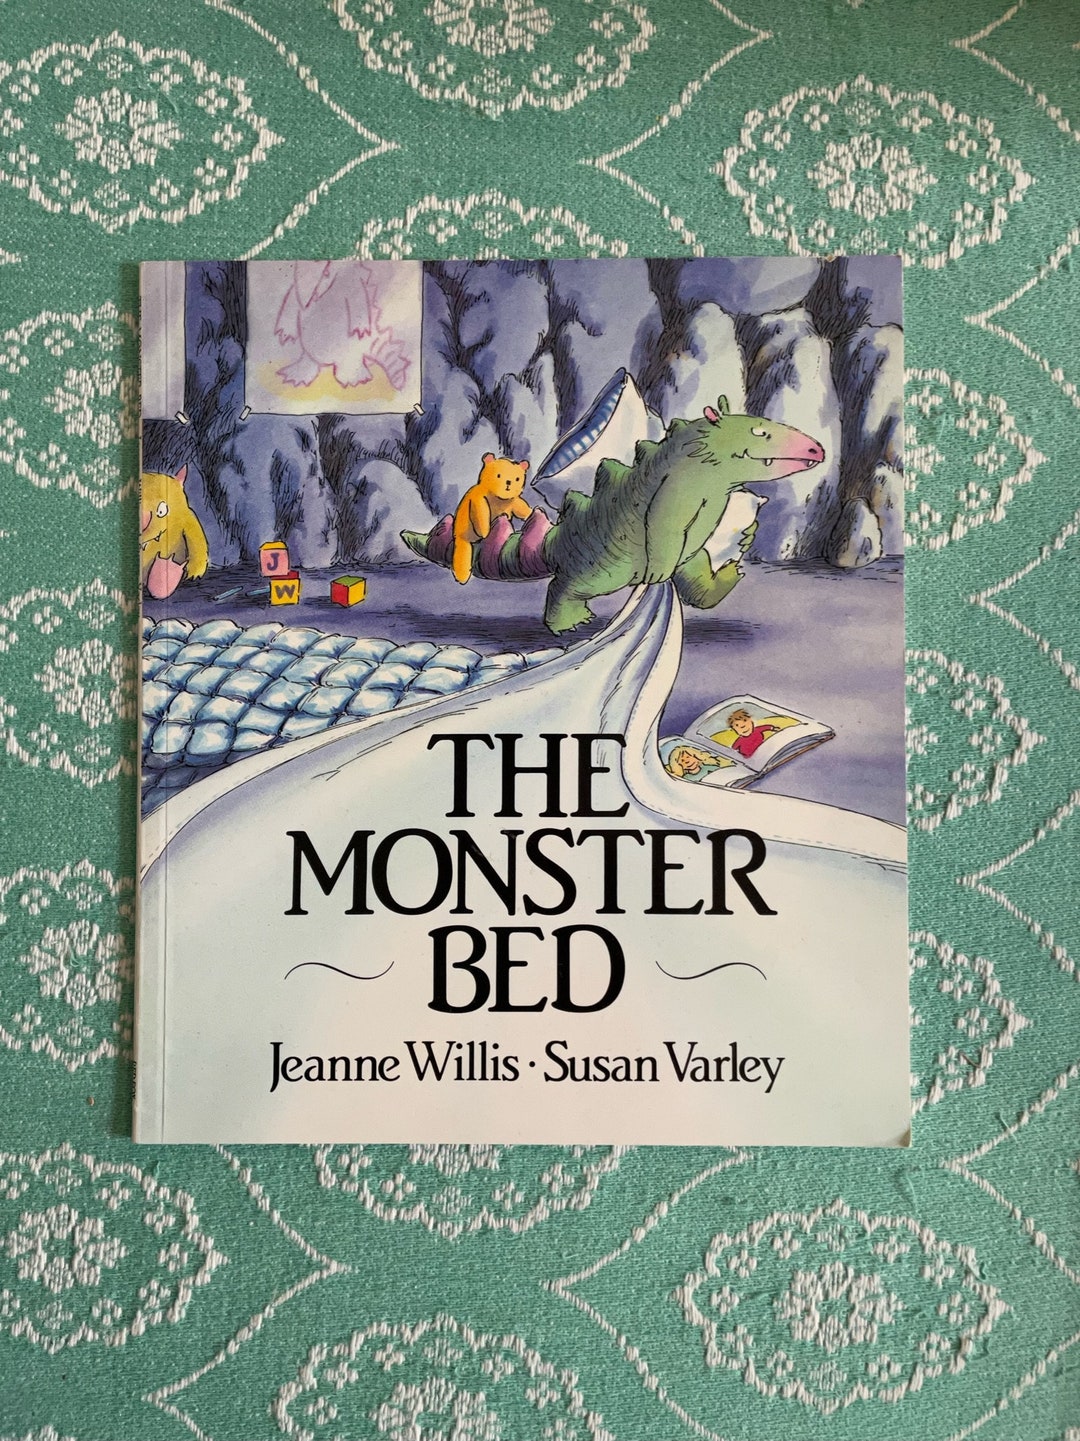 THE MONSTER BED